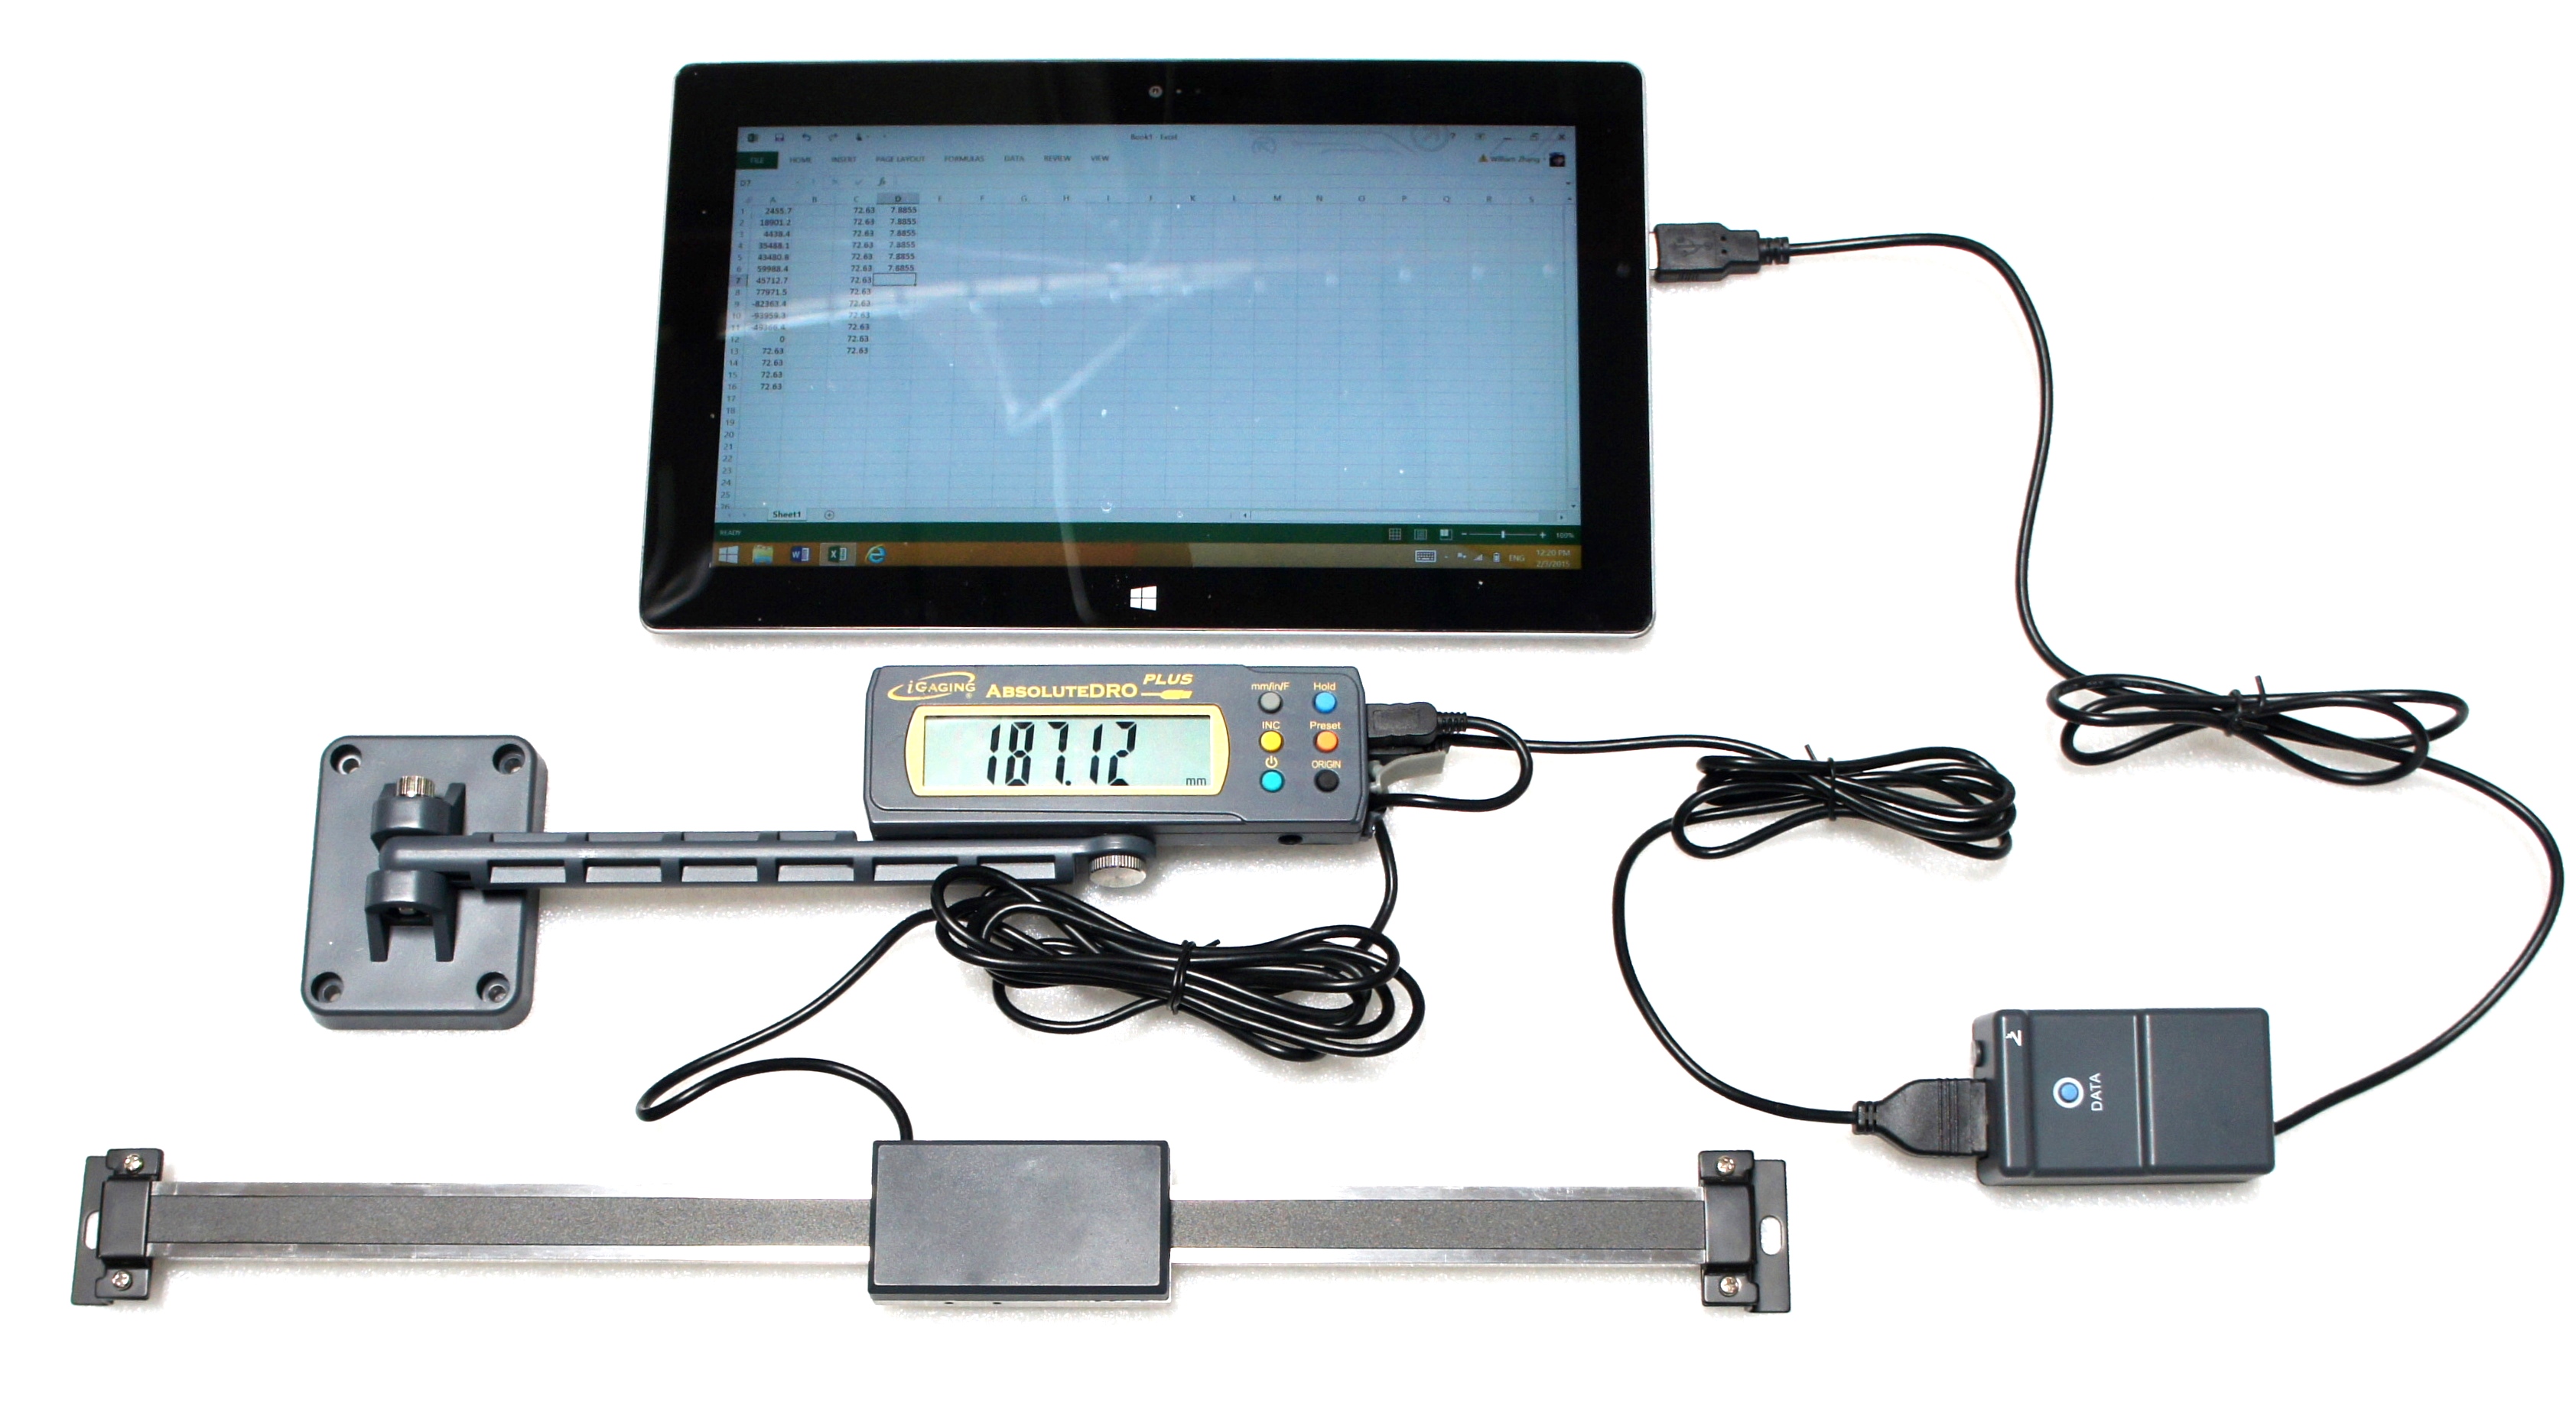 iGagigng Absolute DRO Digital Readout 38" / 965mm Read Out Stainless Steel Beam